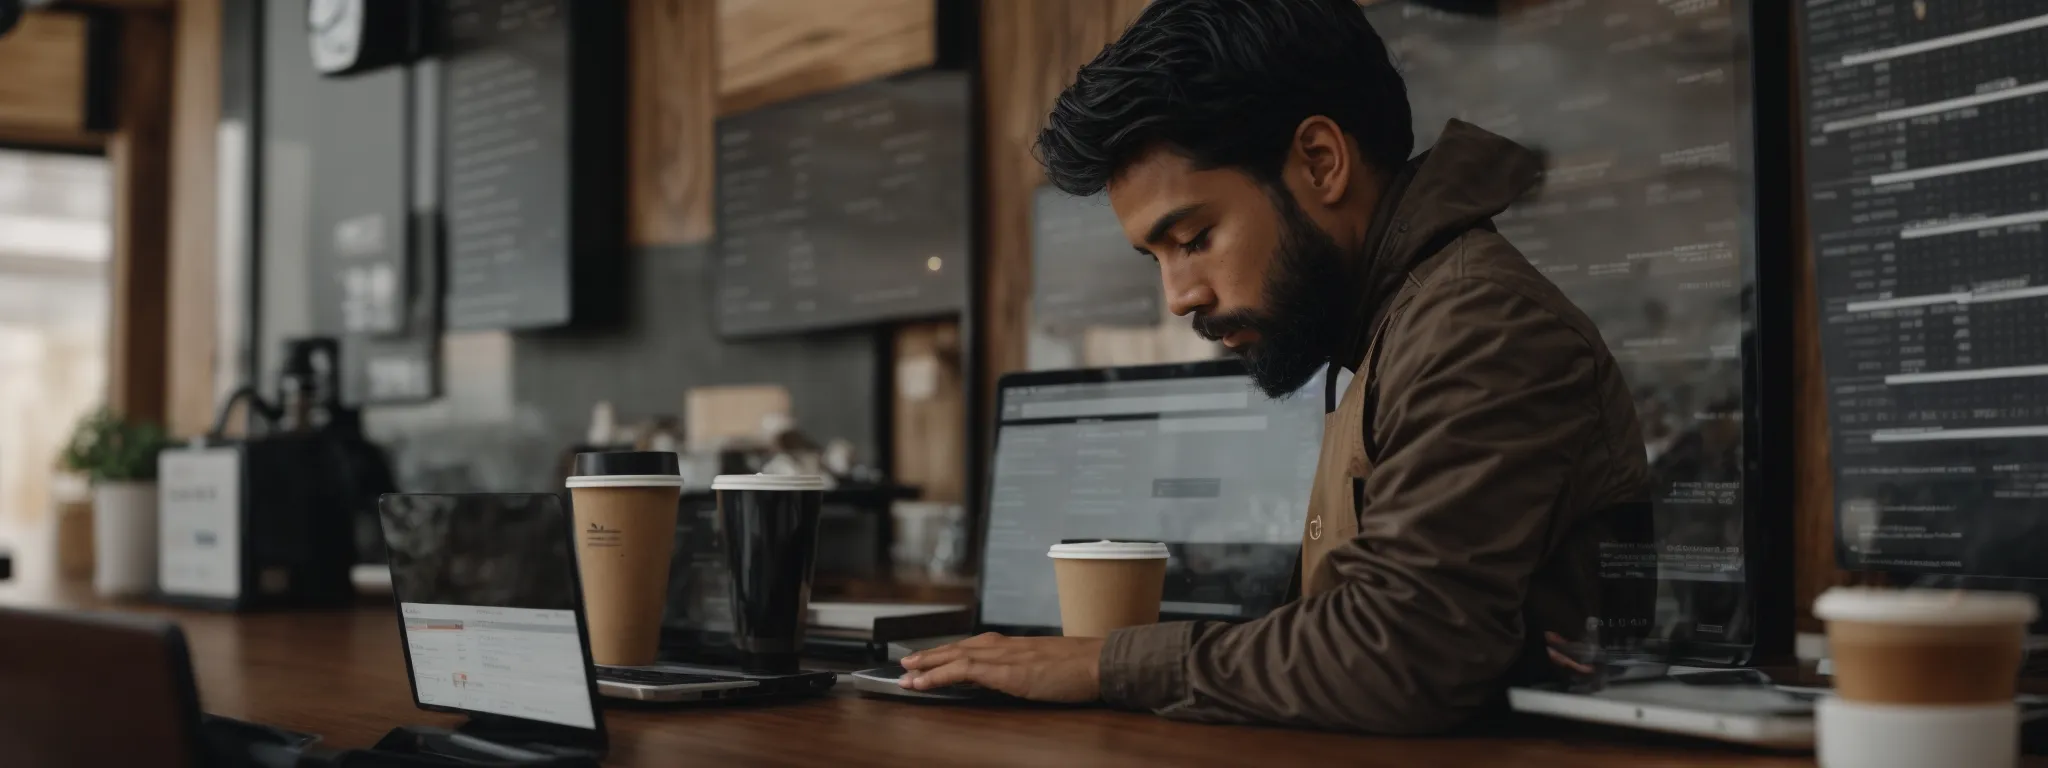 a local coffee shop owner browses an analytics dashboard on a laptop, highlighting the visibility of his business in local online search results.